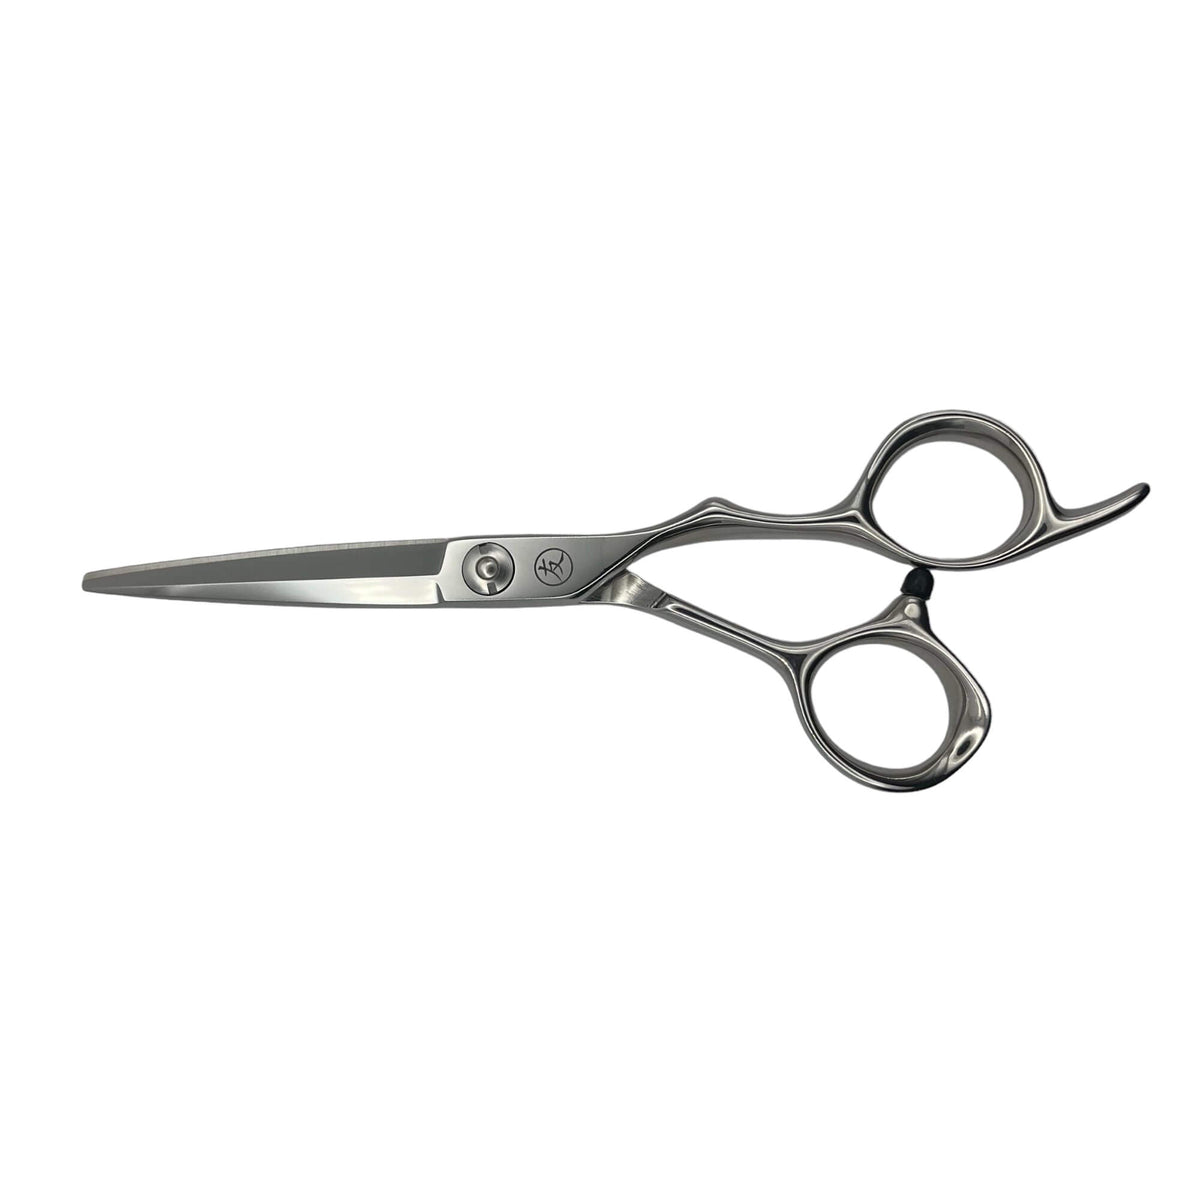 AK Z-1 Master Hairdressing Scissors side angle 5.5 inch